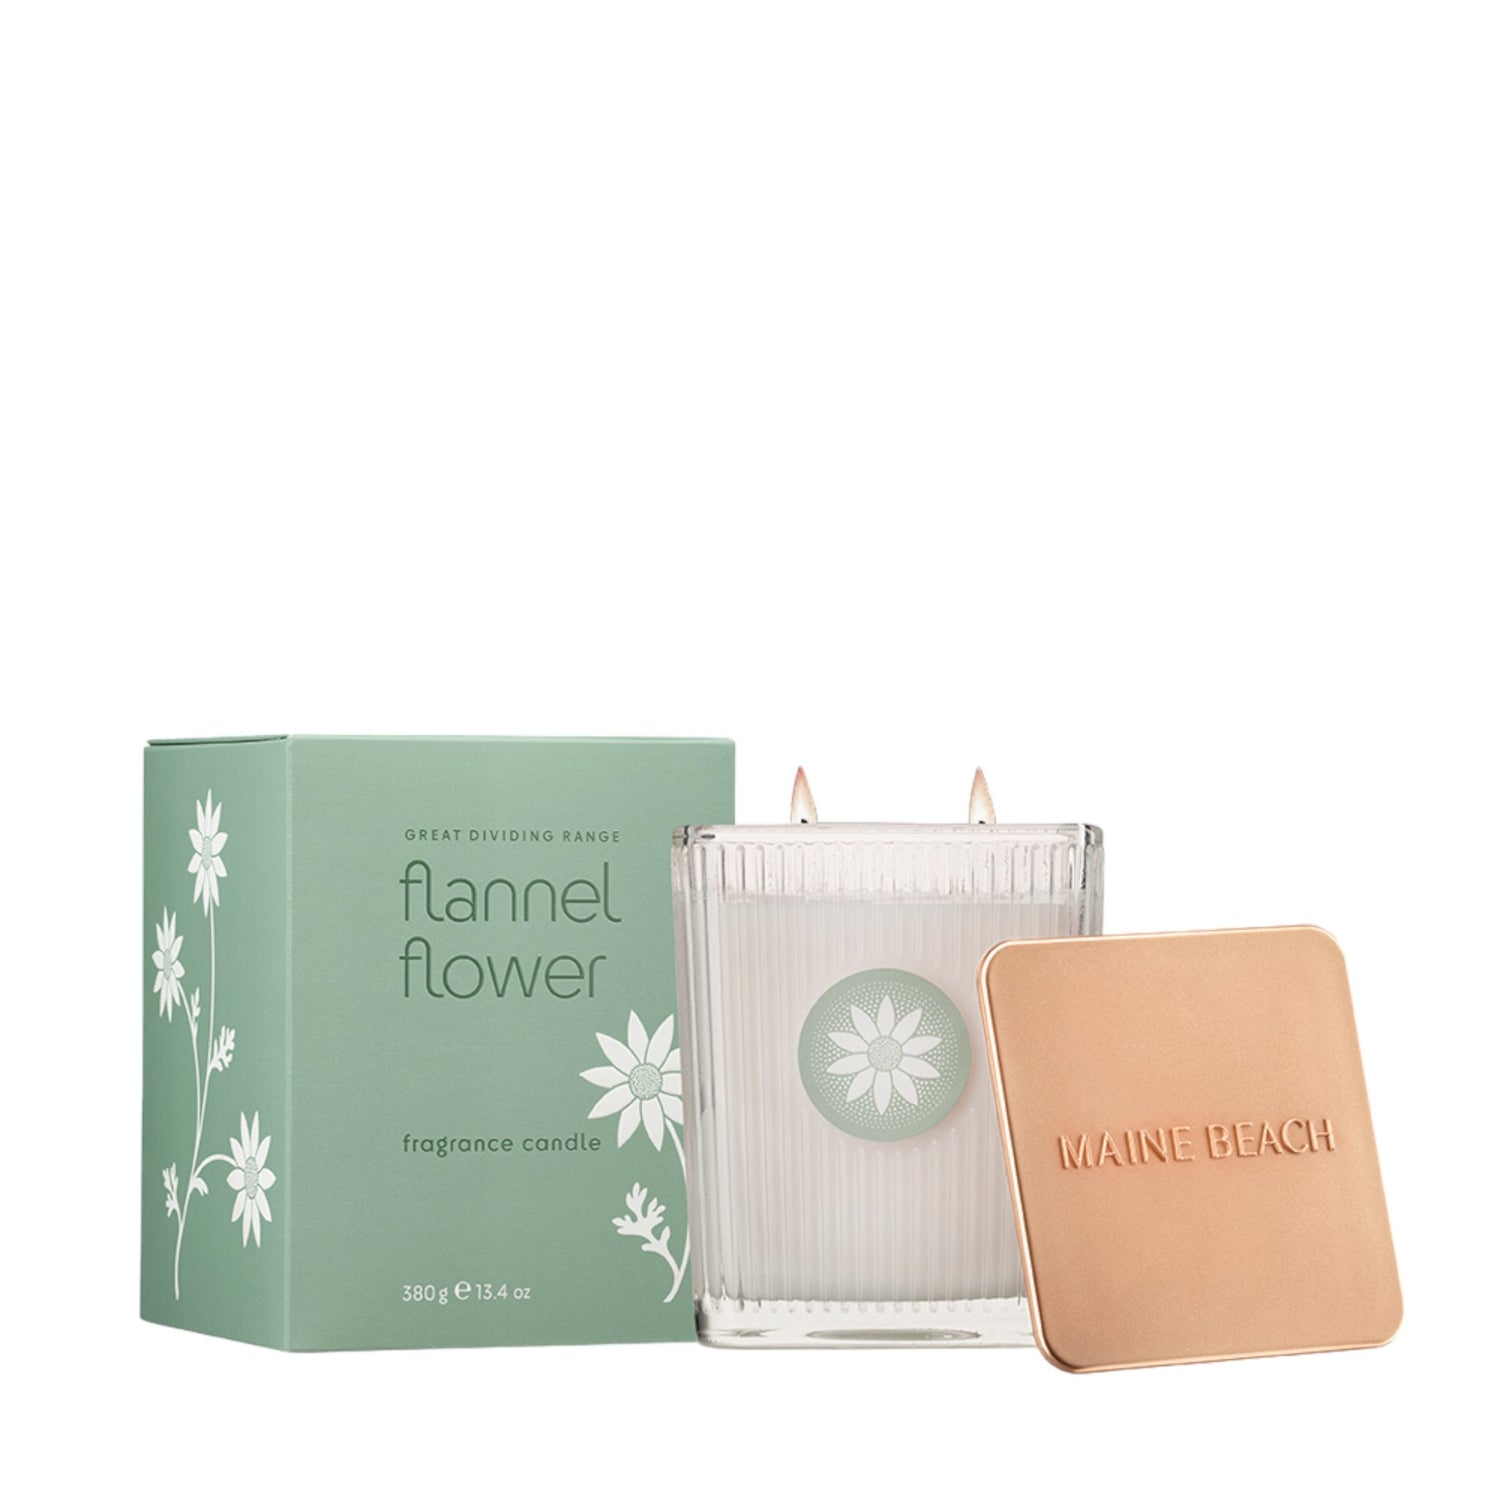 Flannel Flower Fragranced Candle